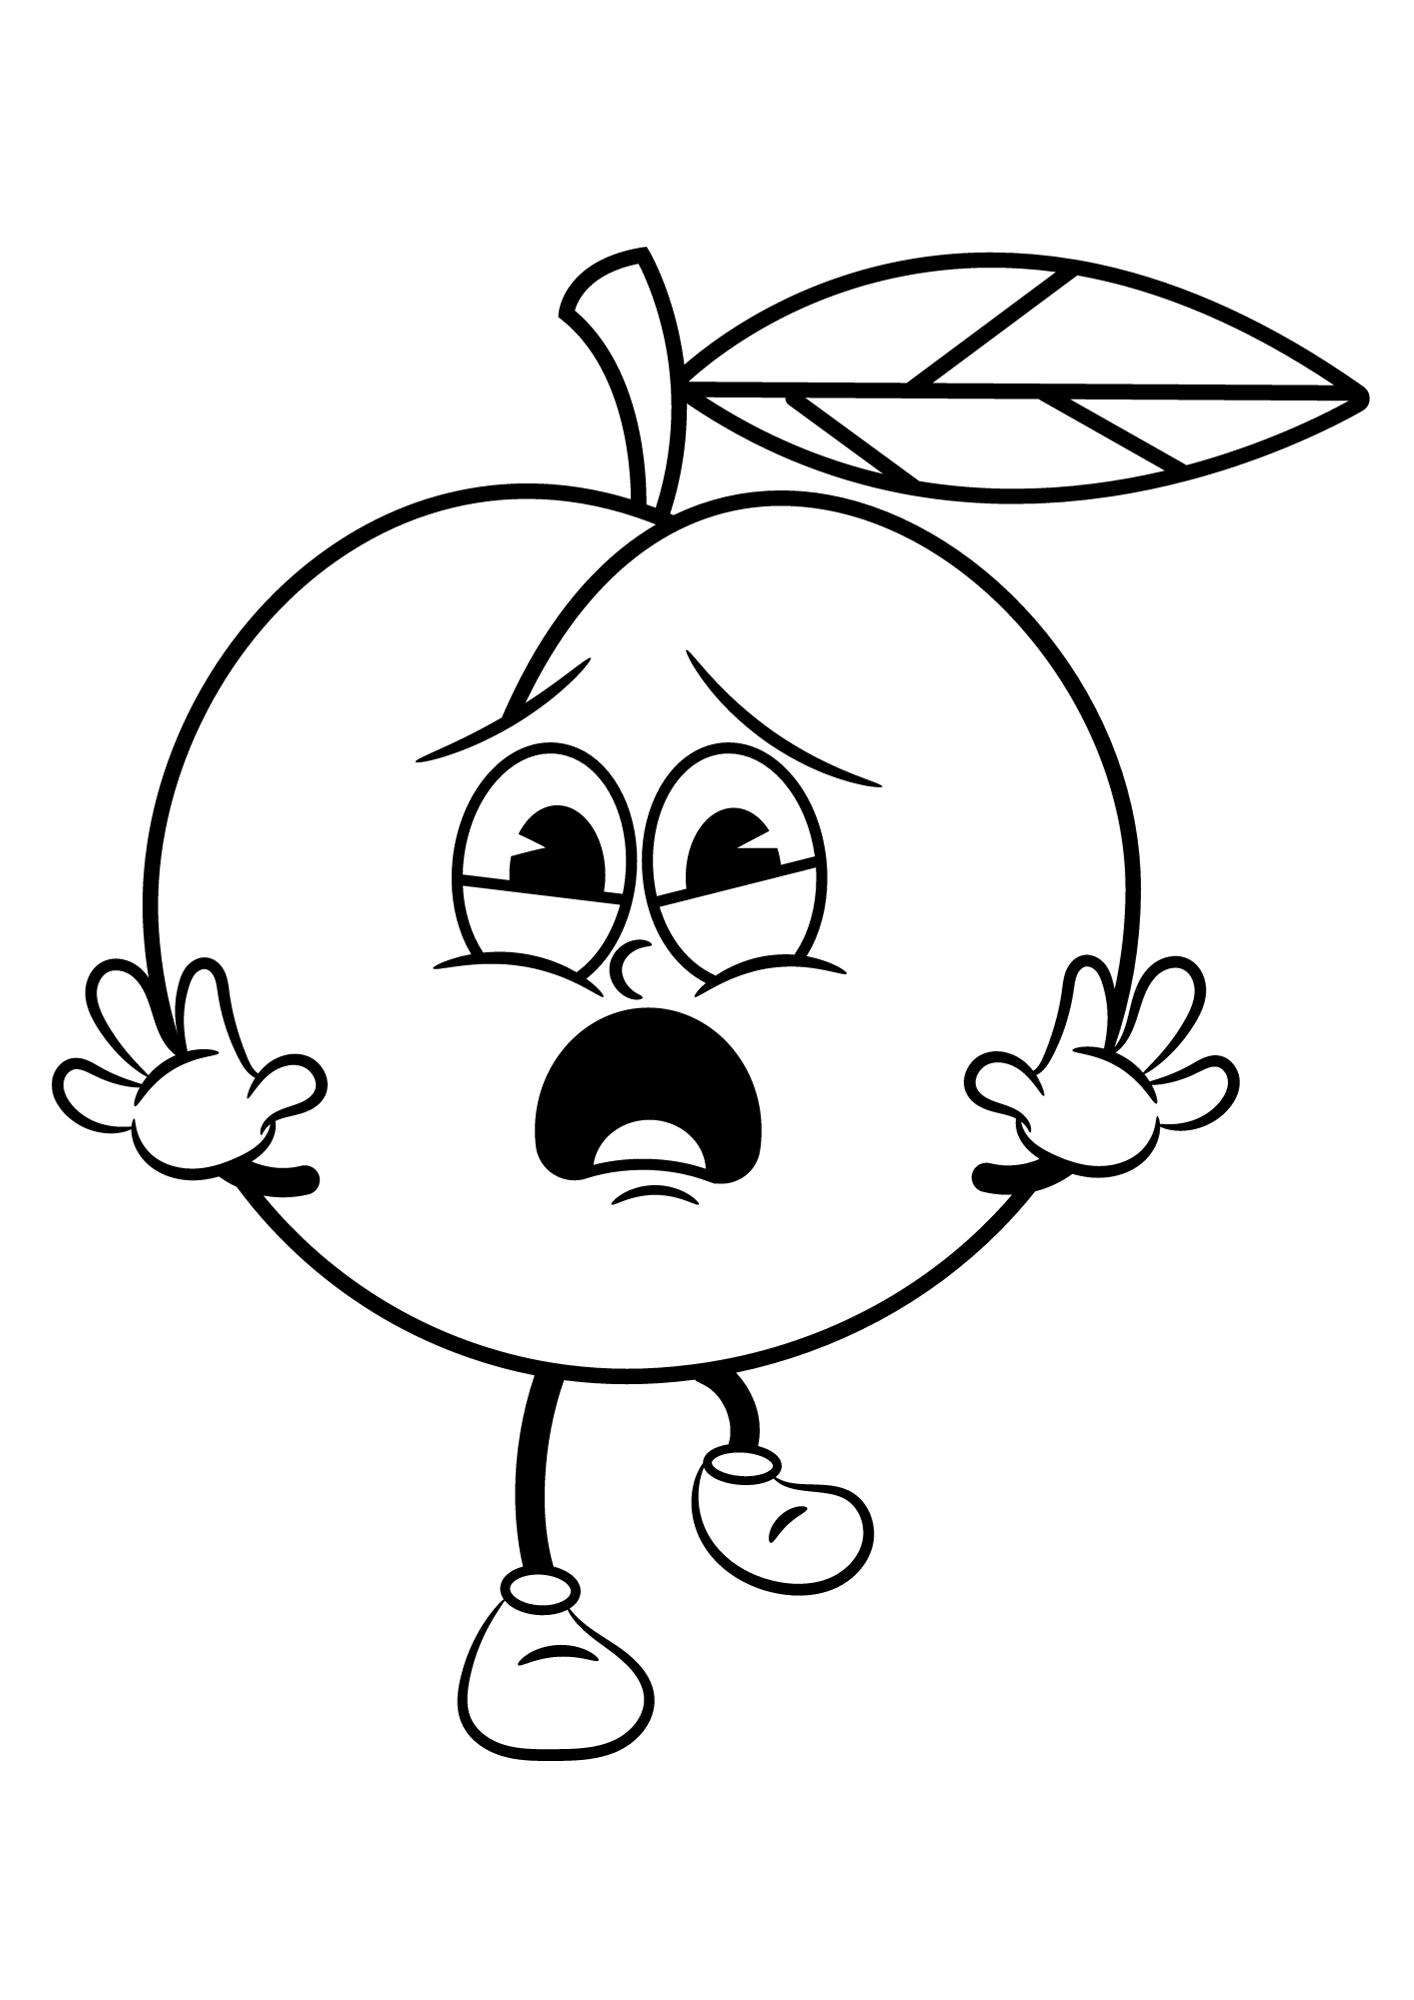 Apricot Cartoon Coloring Pages